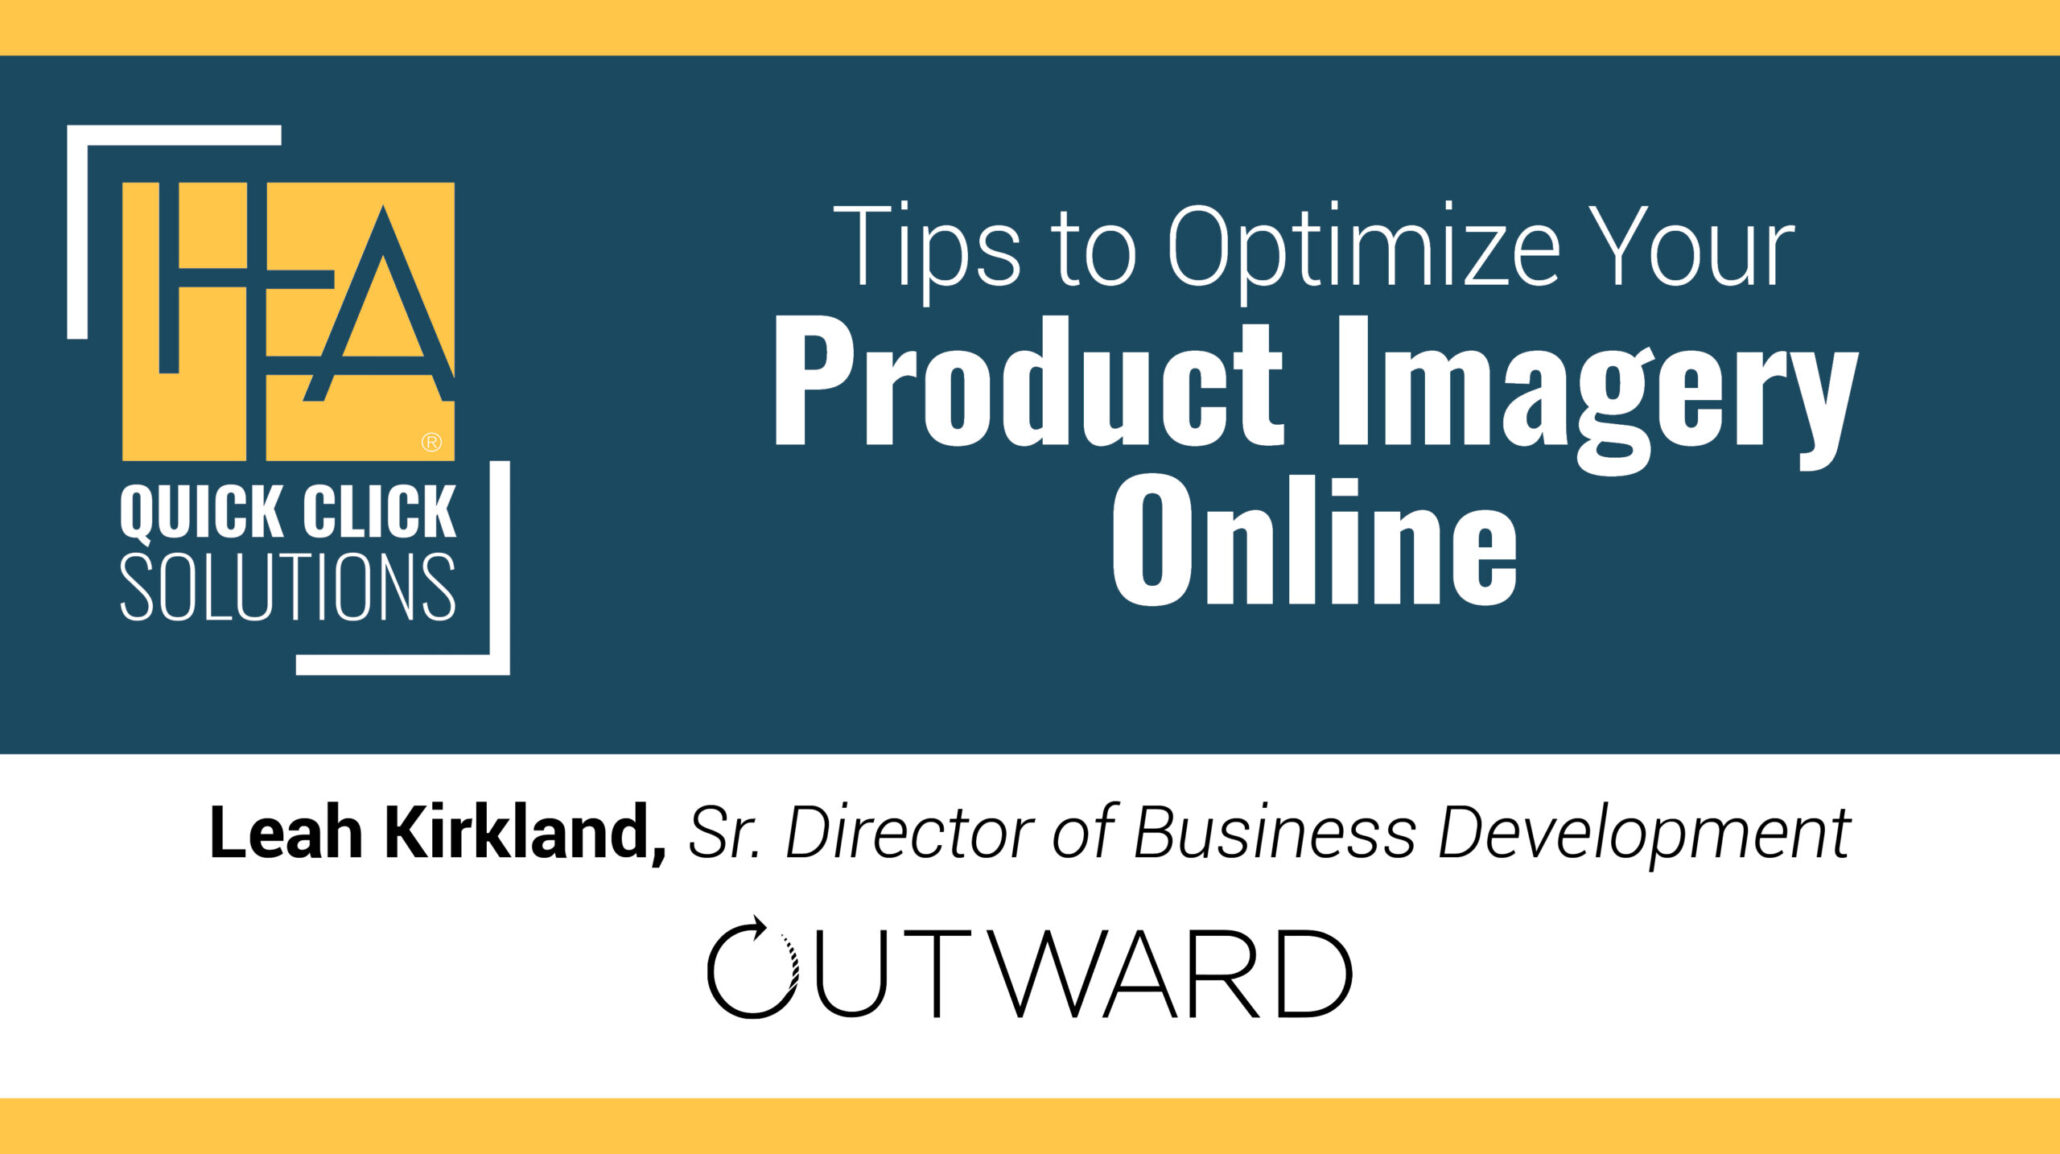 HFA_QCS-Tips to Optimize Your Product Imagery Online